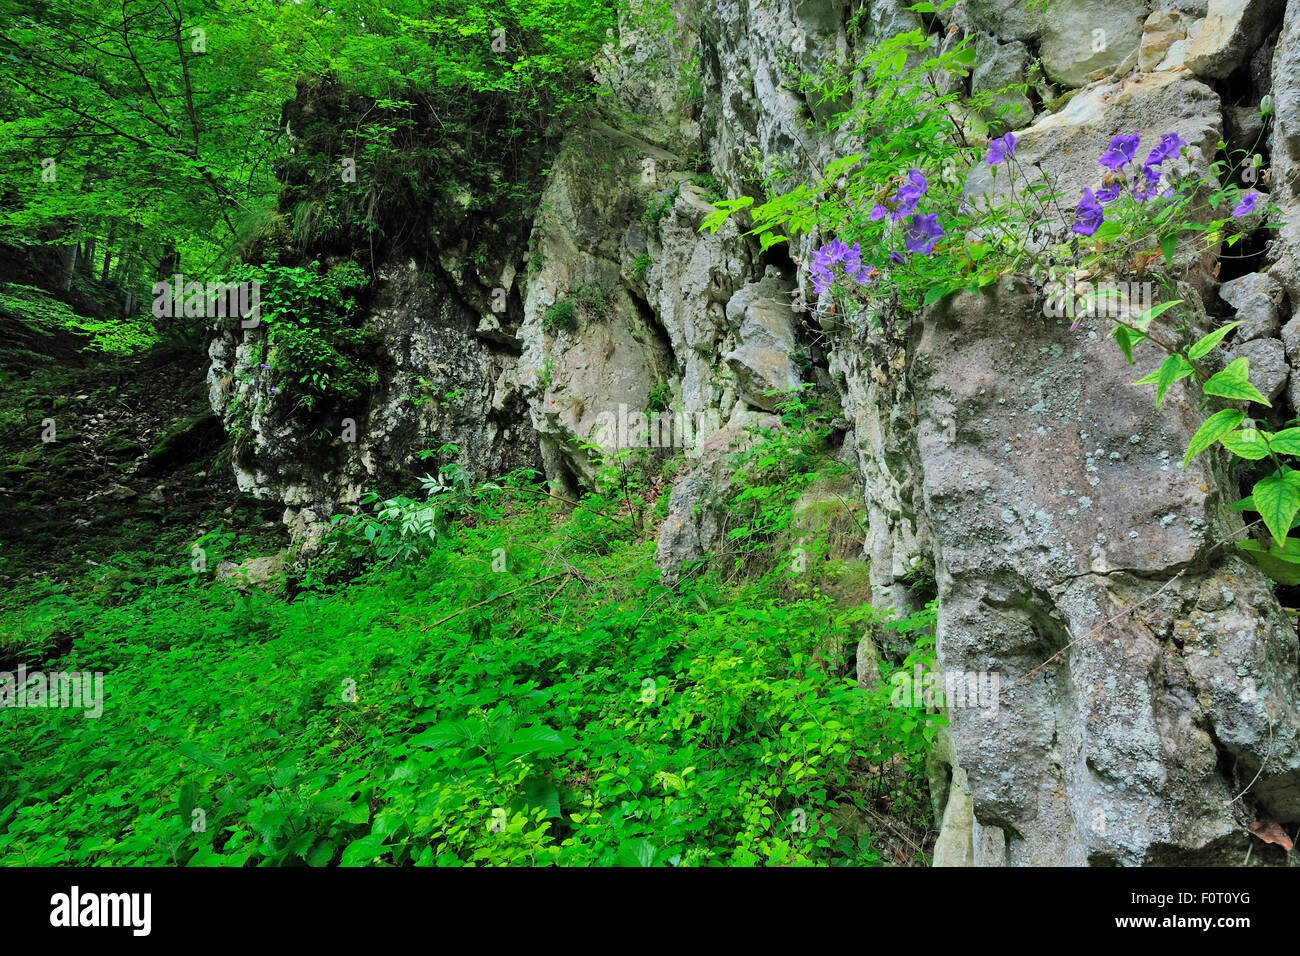 Bellflower (Campanula sp) growing between cracks in the rock face, Crovul Valley Gorge, Arges County, Leota mountain range, Carpathian Mountains, Romania, July Stock Photo